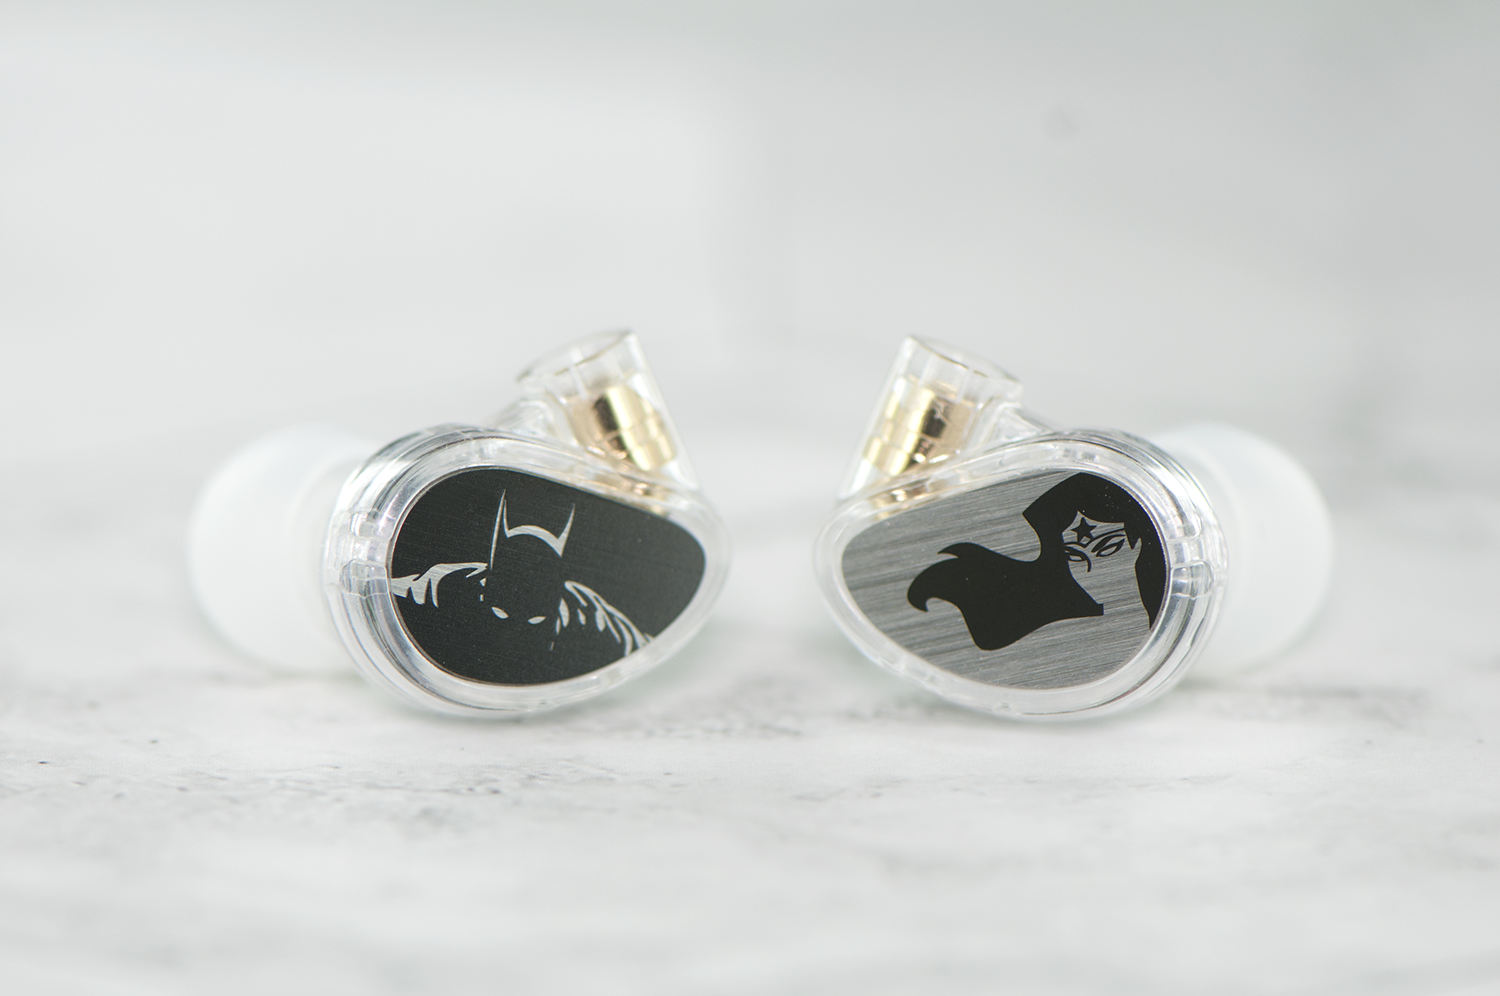 Two in-ear monitors with clear silicone tips and transparent casings, showcasing custom black and silver superhero designs on the back plates, resting on a marble surface.